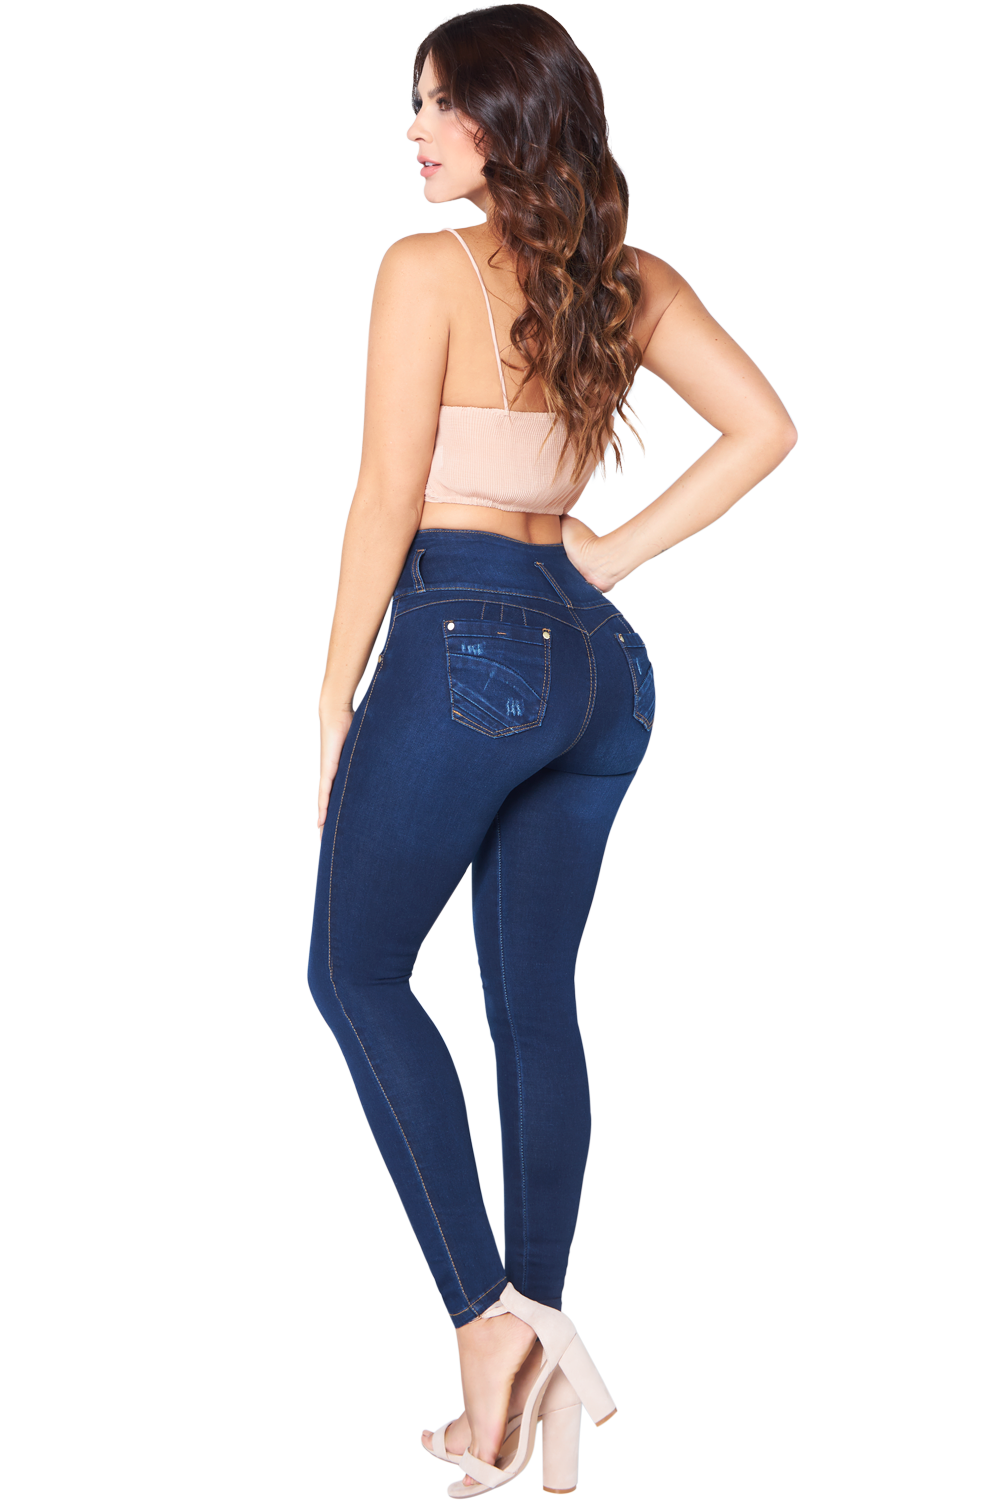 Jackie London Jeans 2201 High Rise Skinny Push Up Jeans For A Flatte